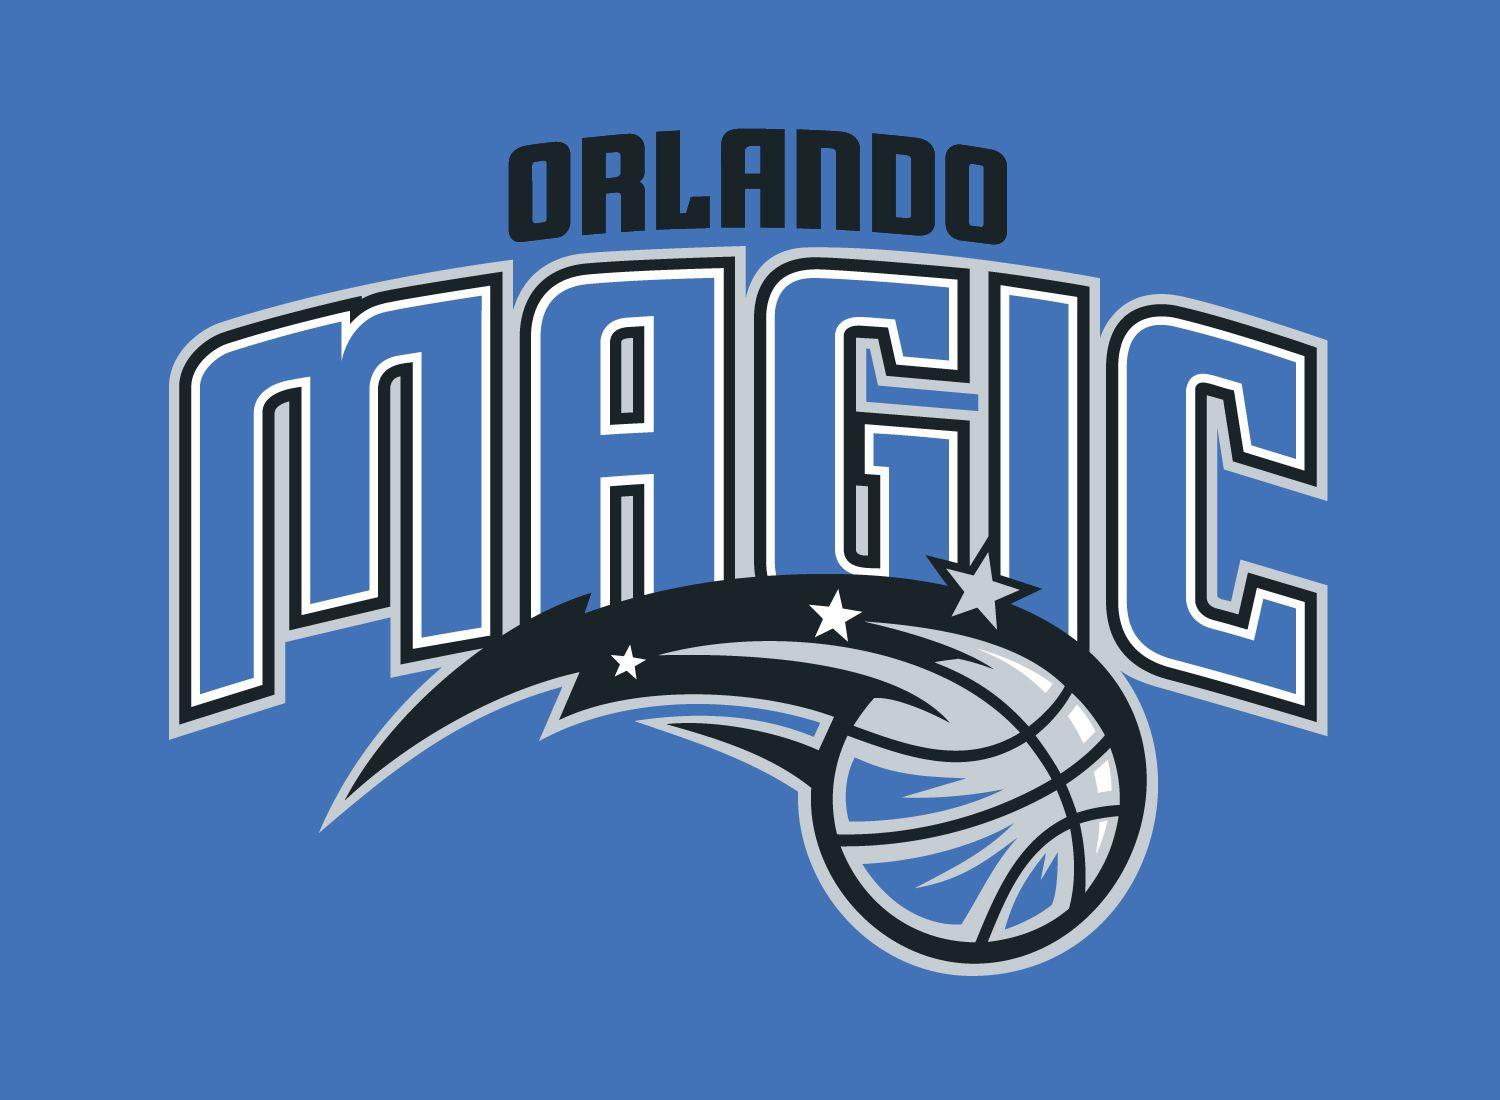 Orlando Magic Logo - Orlando Magic Logo, Orlando Magic Symbol, Meaning, History and Evolution